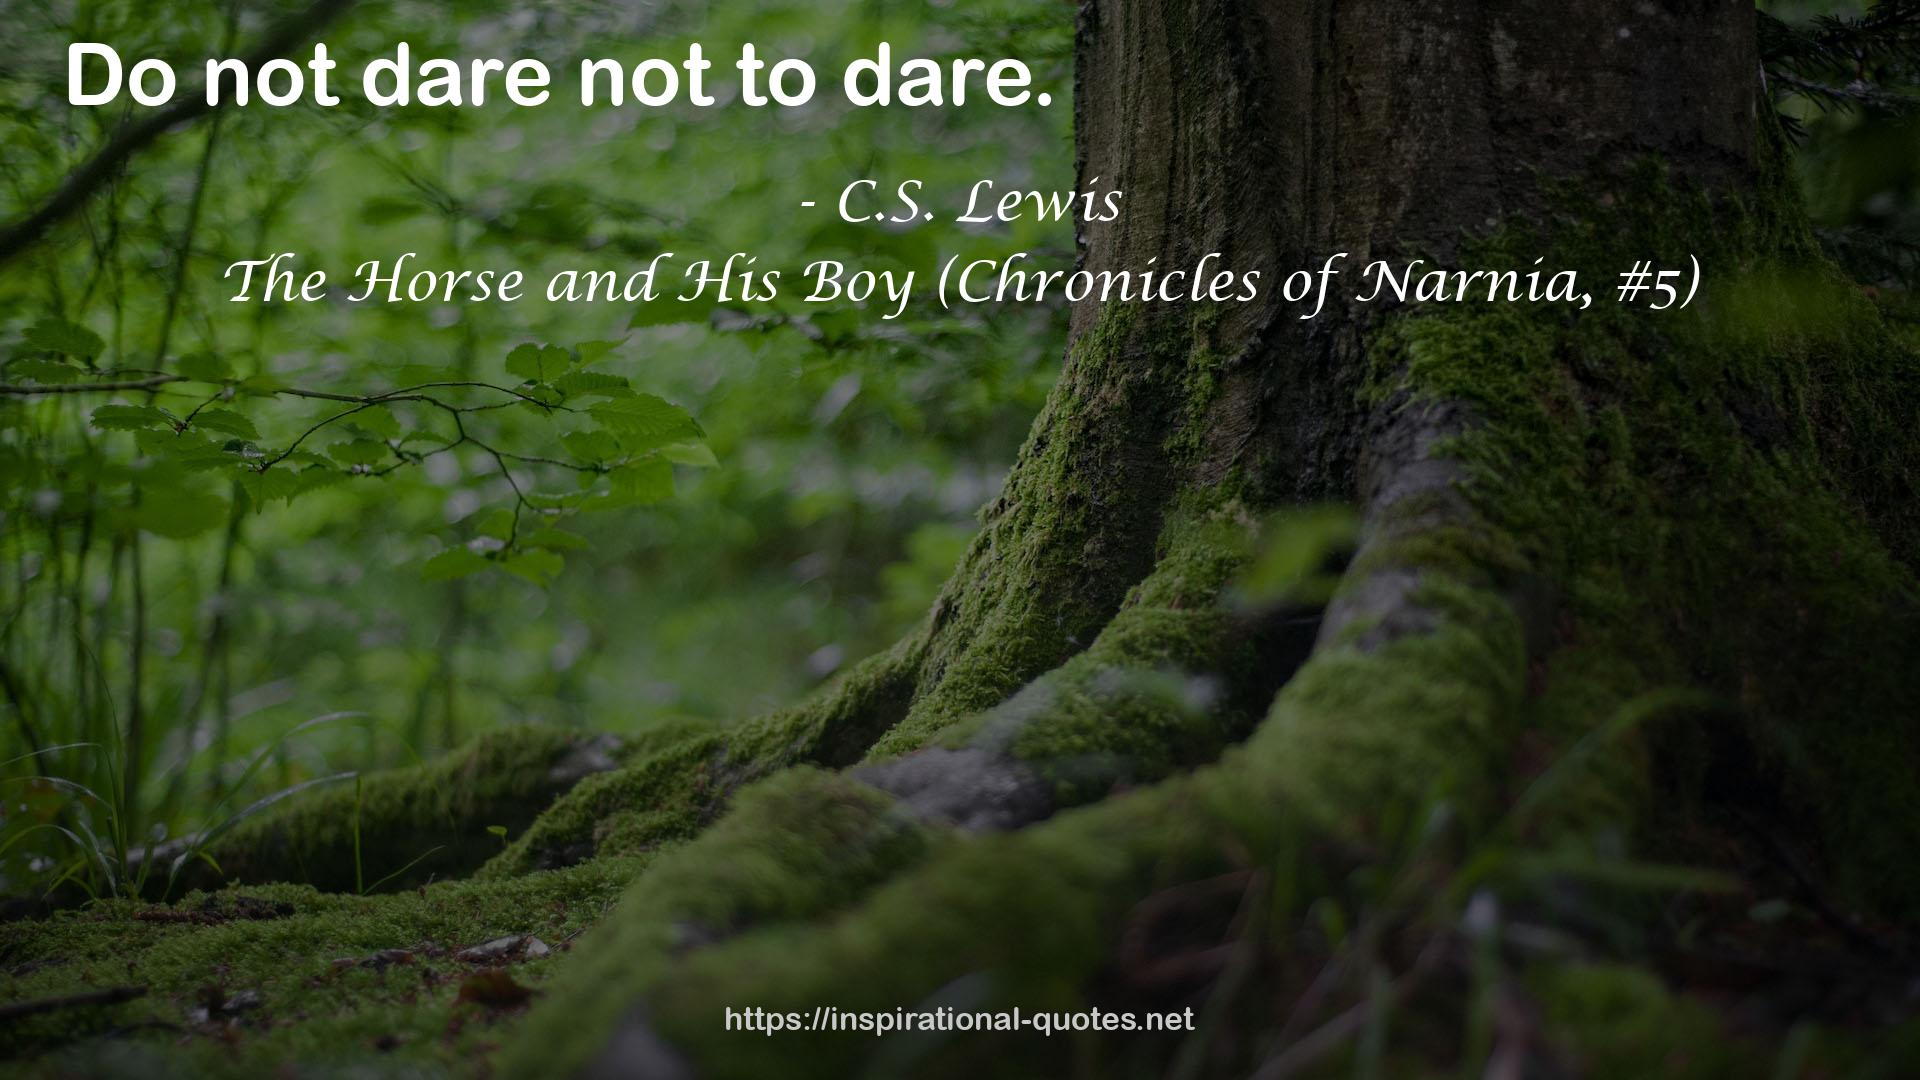 The Horse and His Boy (Chronicles of Narnia, #5) QUOTES